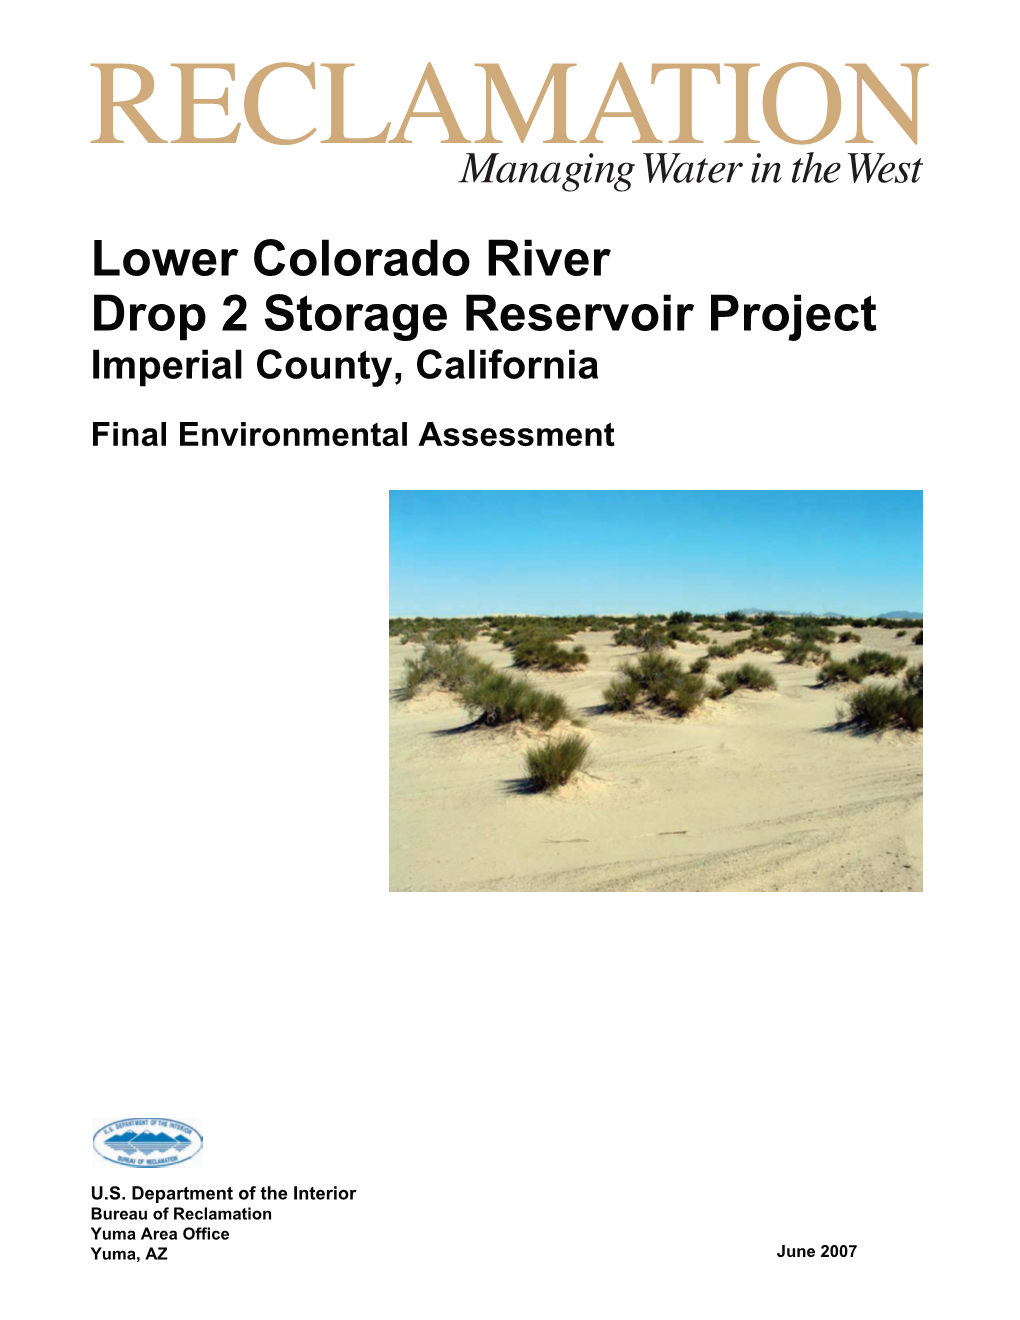 Lower Colorado River Drop 2 Storage Reservoir Project Imperial County, California Final Environmental Assessment